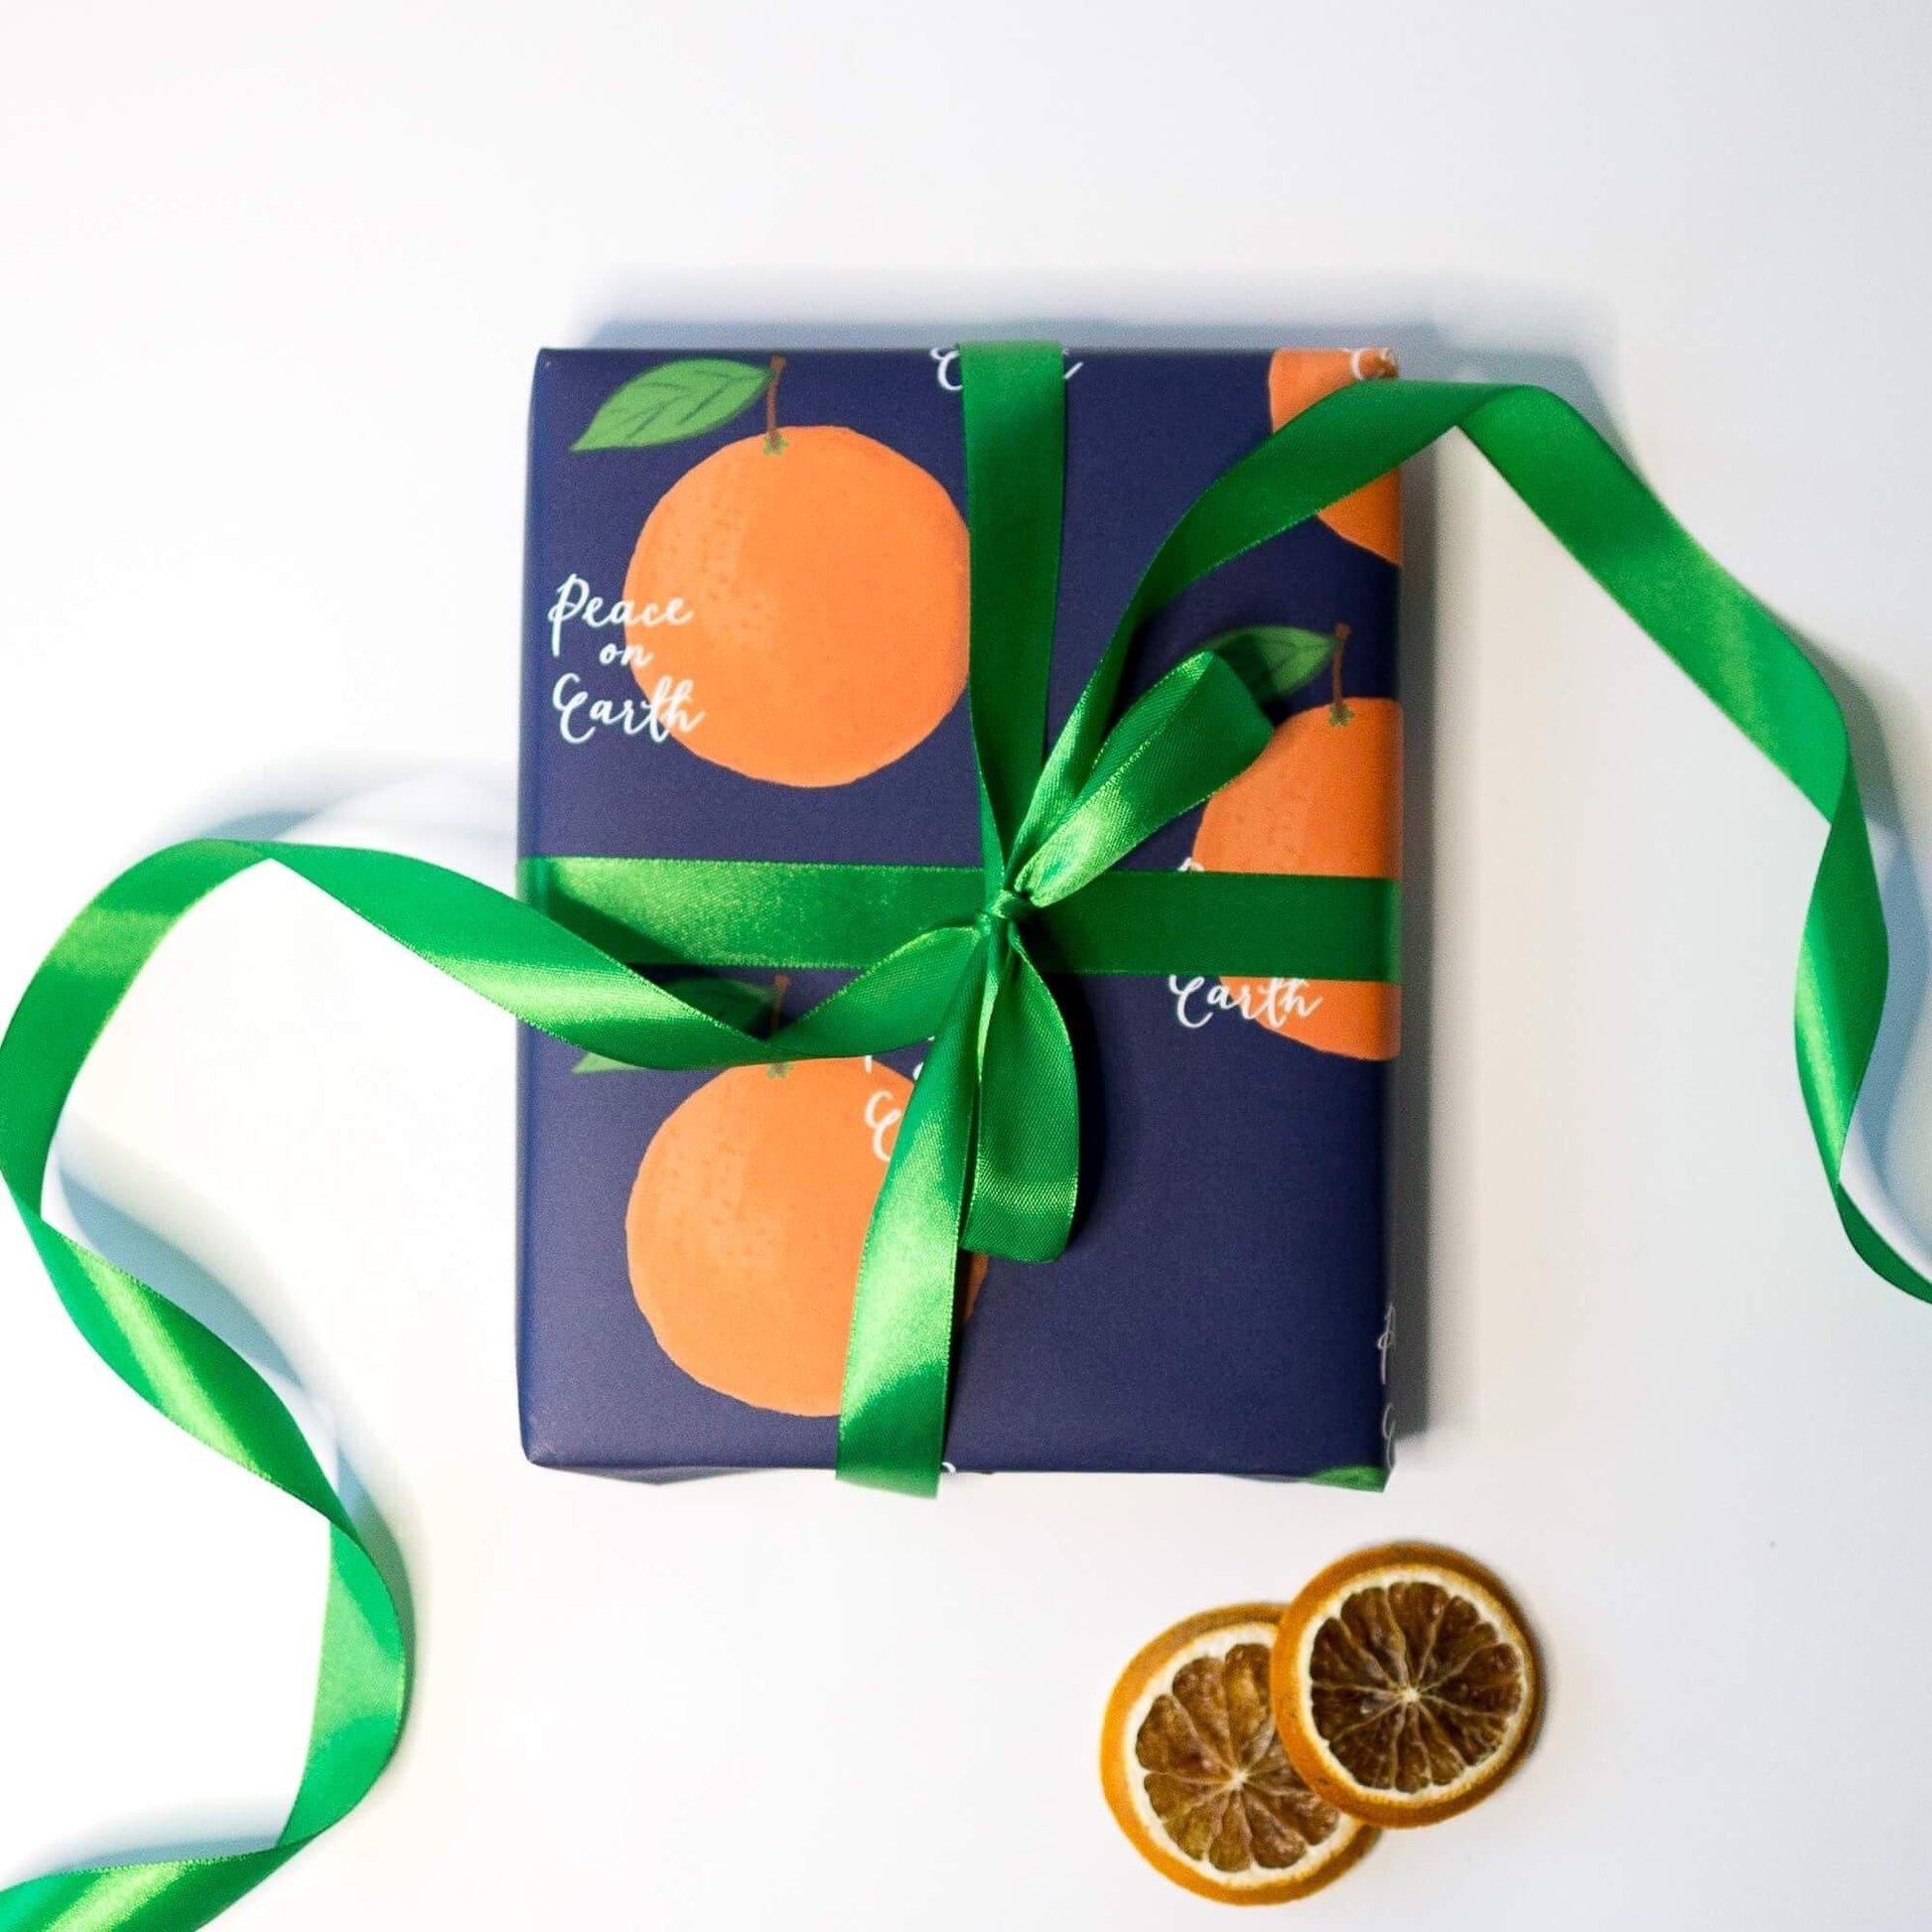 Christian peace on earth and oranges gift wrap